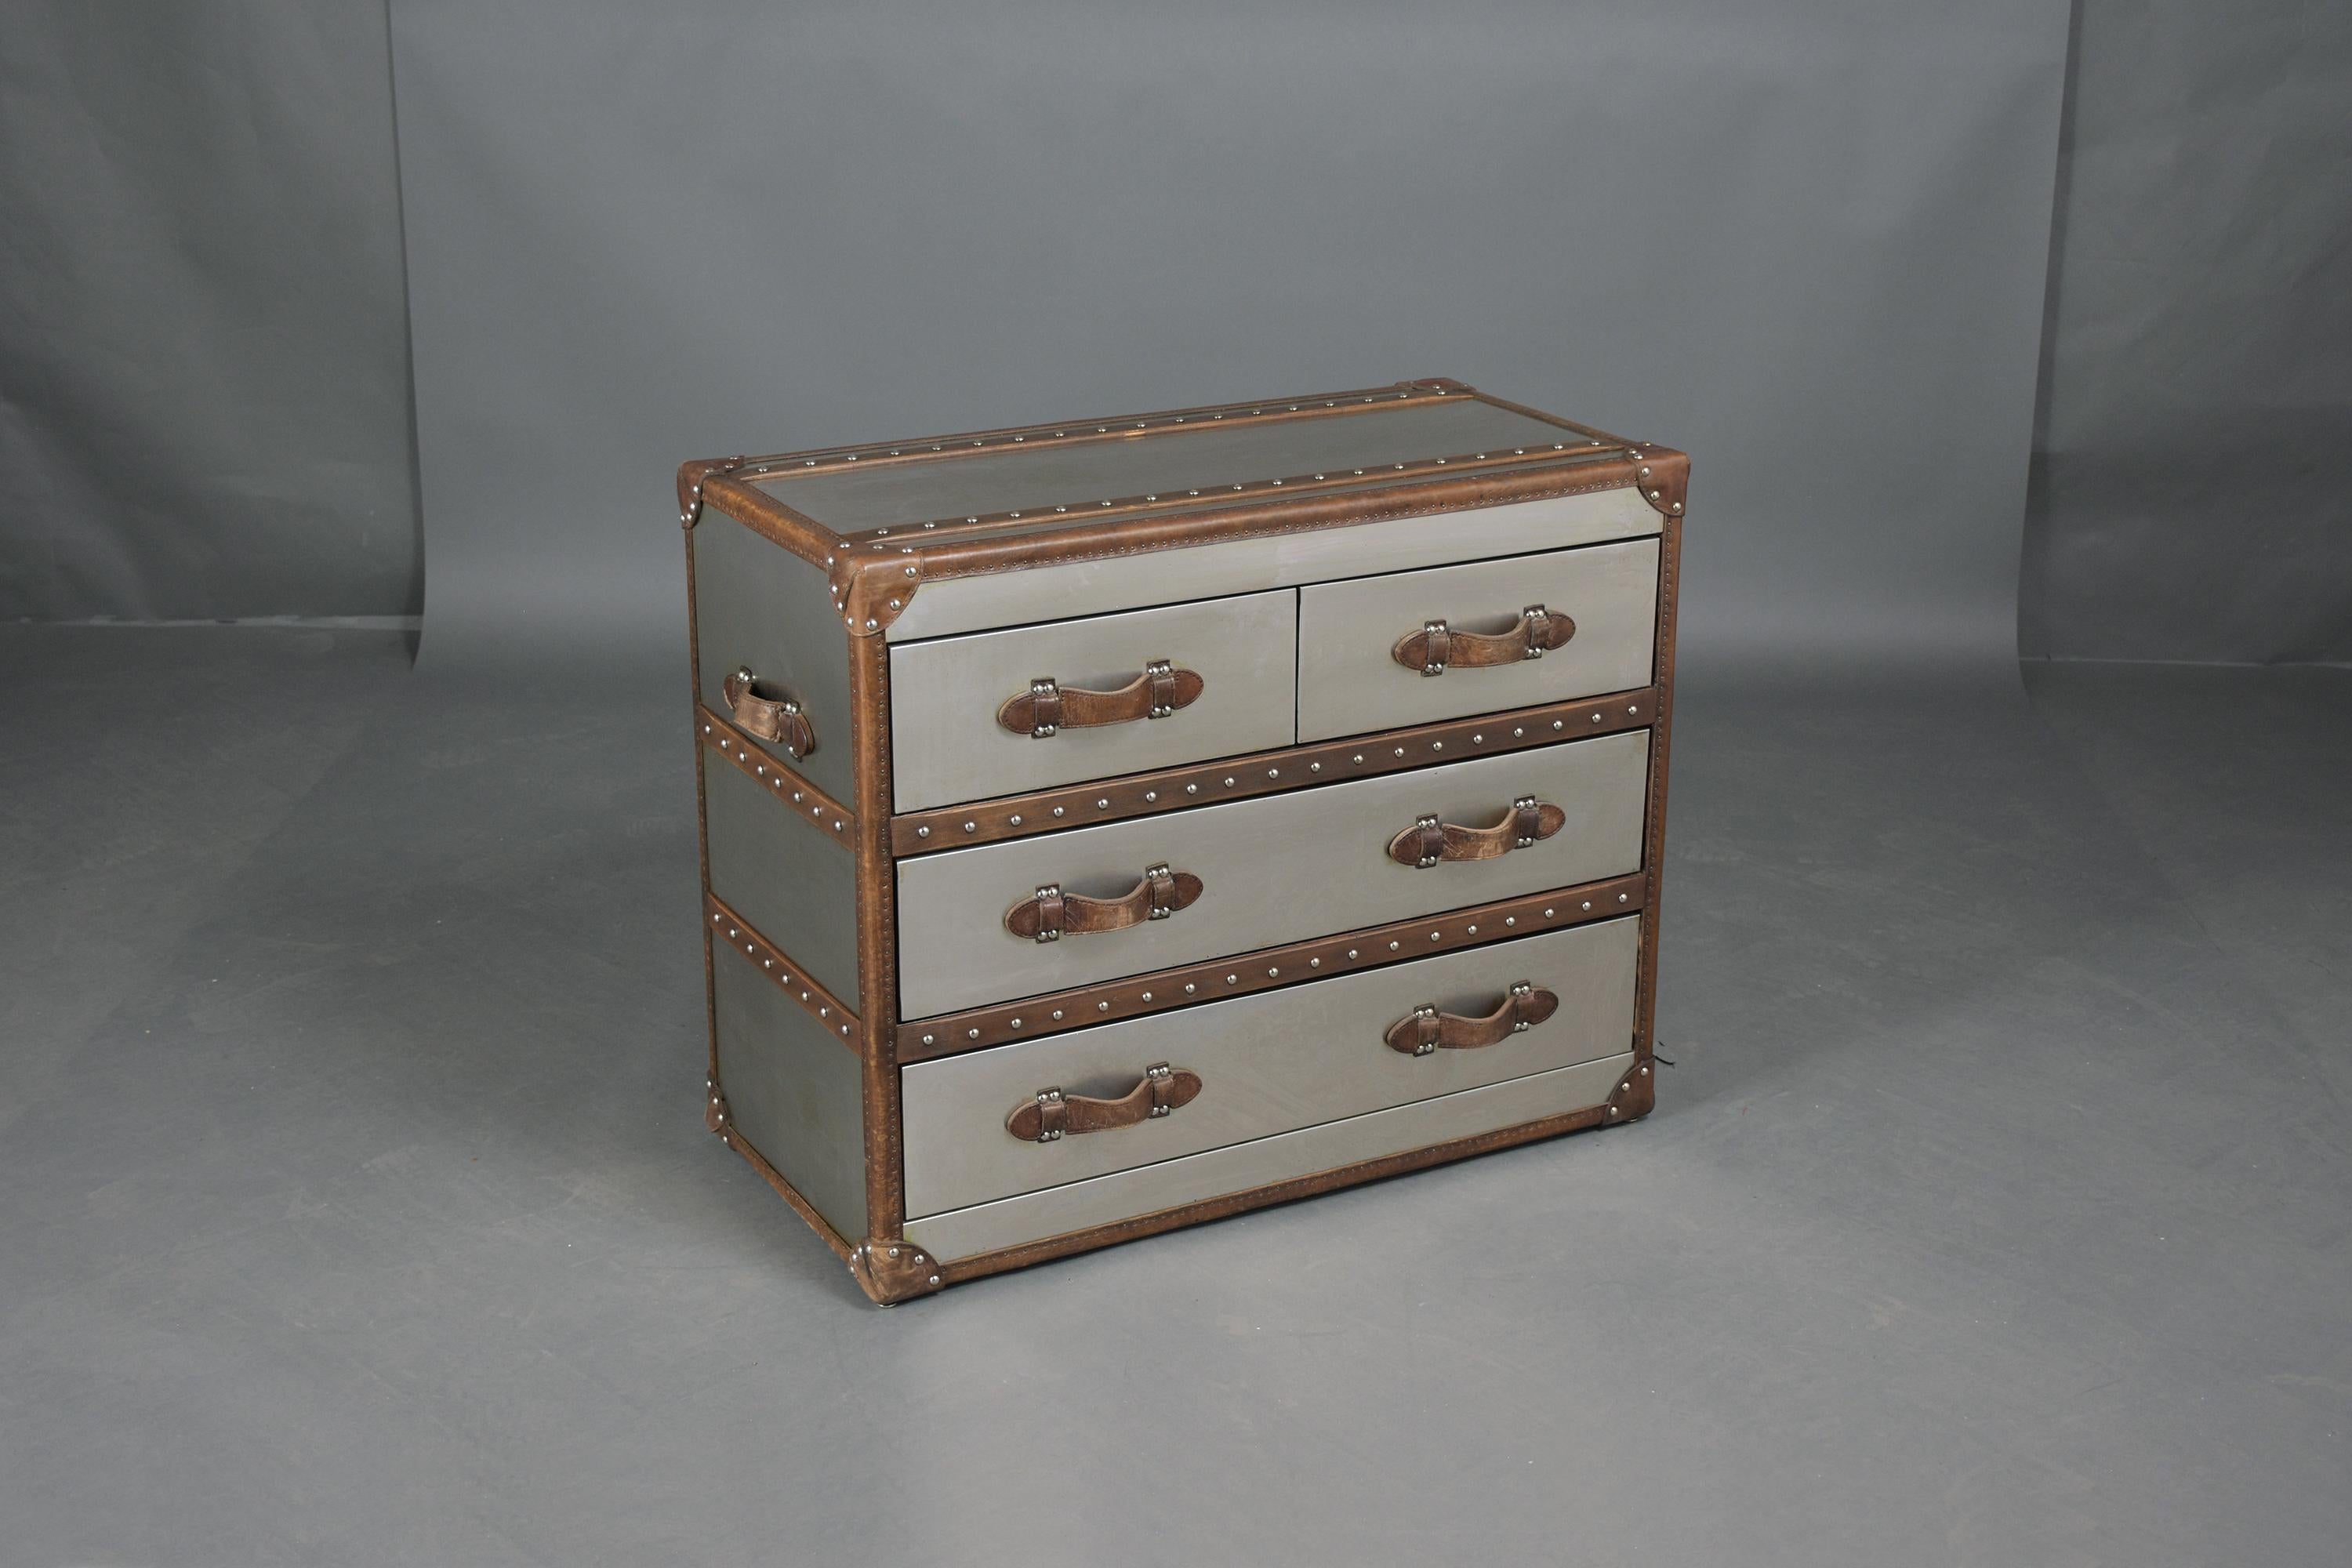 This extraordinary 1990s Mid-Century Modern Campaign-style chest of drawers has been professionally restored by our team of expert craftsmen and is crafted out of wood with metal & leather details. The dresser comes with four drawers, two small top